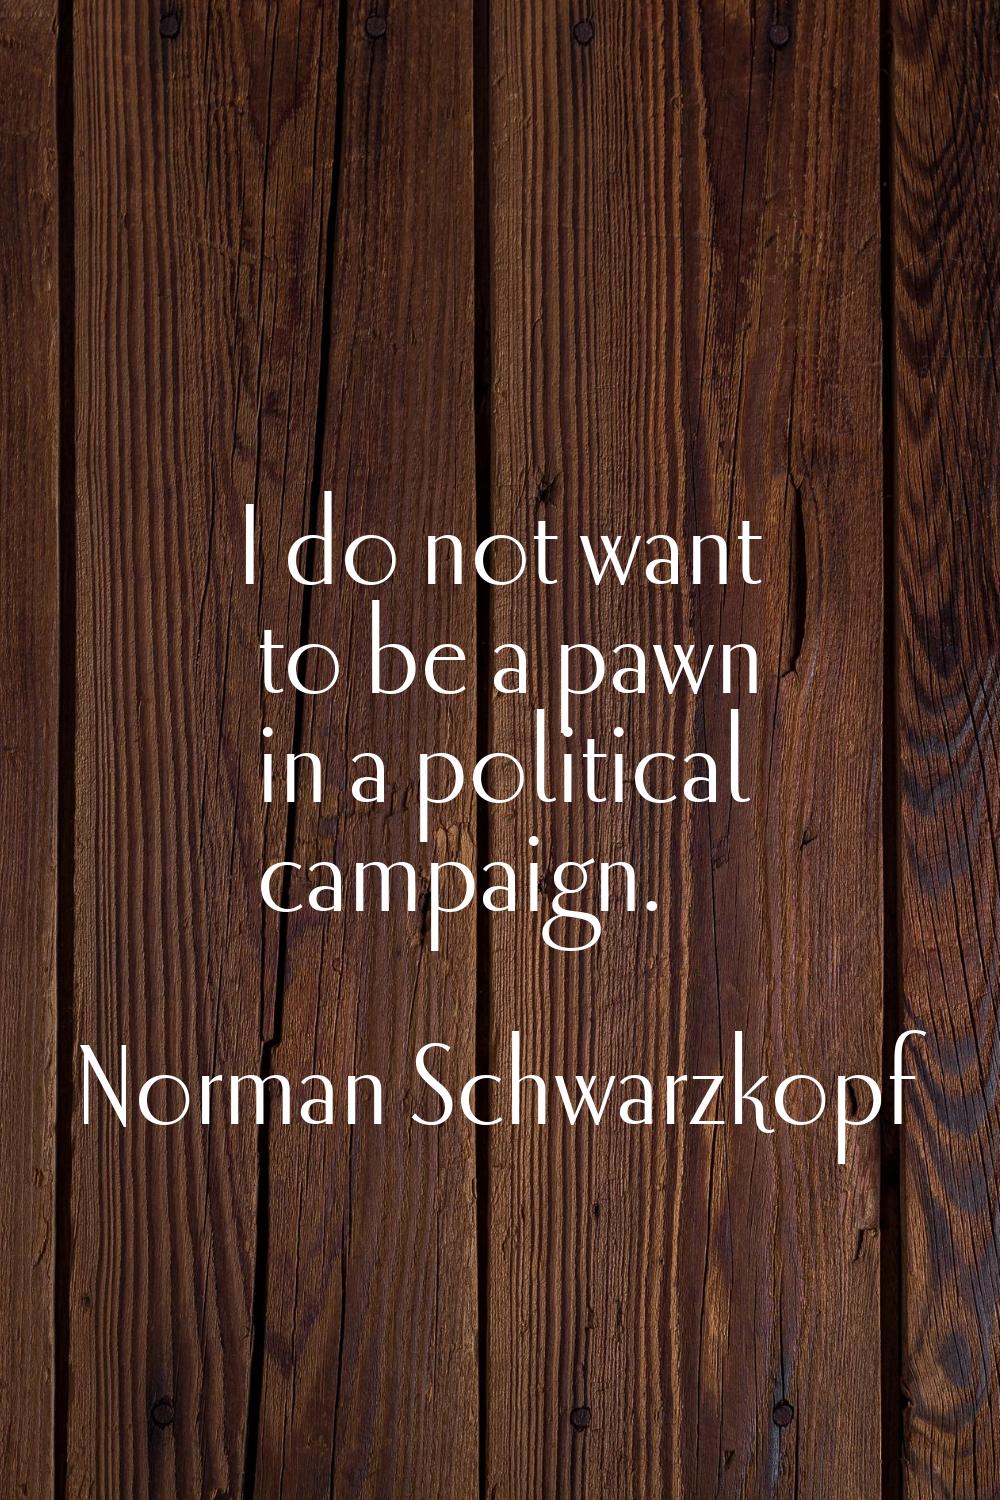 I do not want to be a pawn in a political campaign.